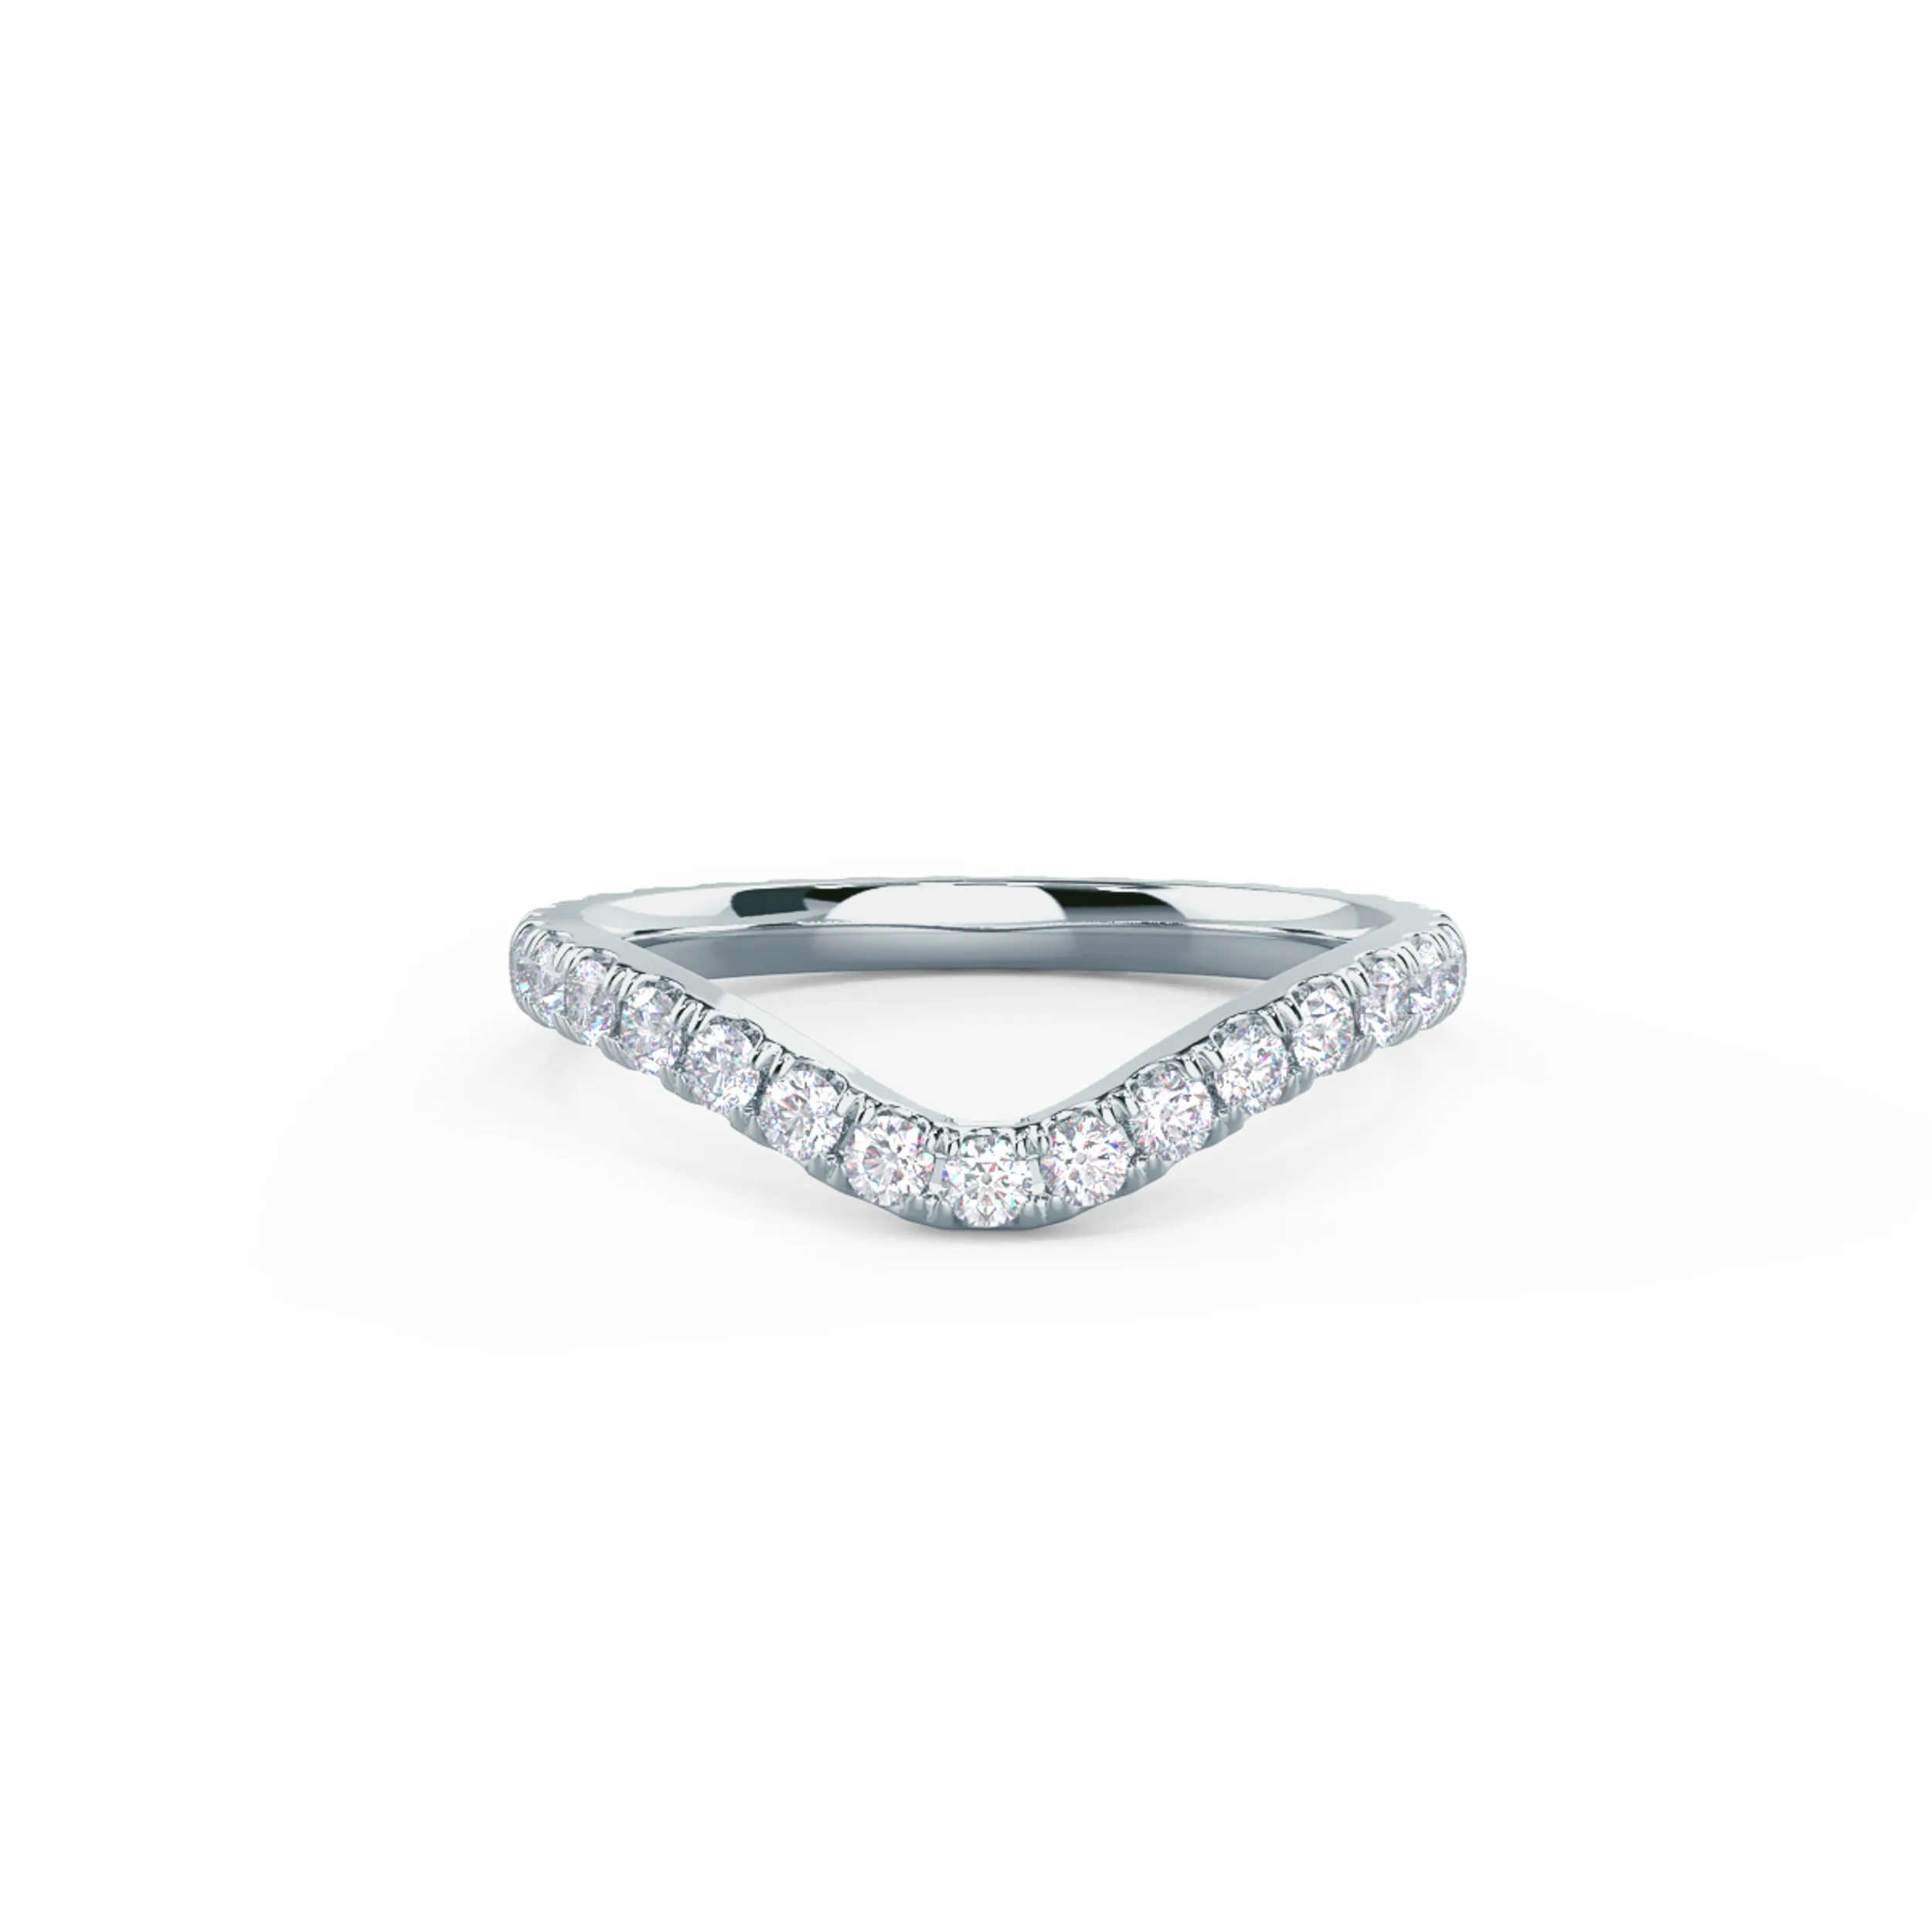 0.7 ct Round Synthetic Diamonds set in 18kt White Gold Pavé Contoured Eternity Band (Main View)